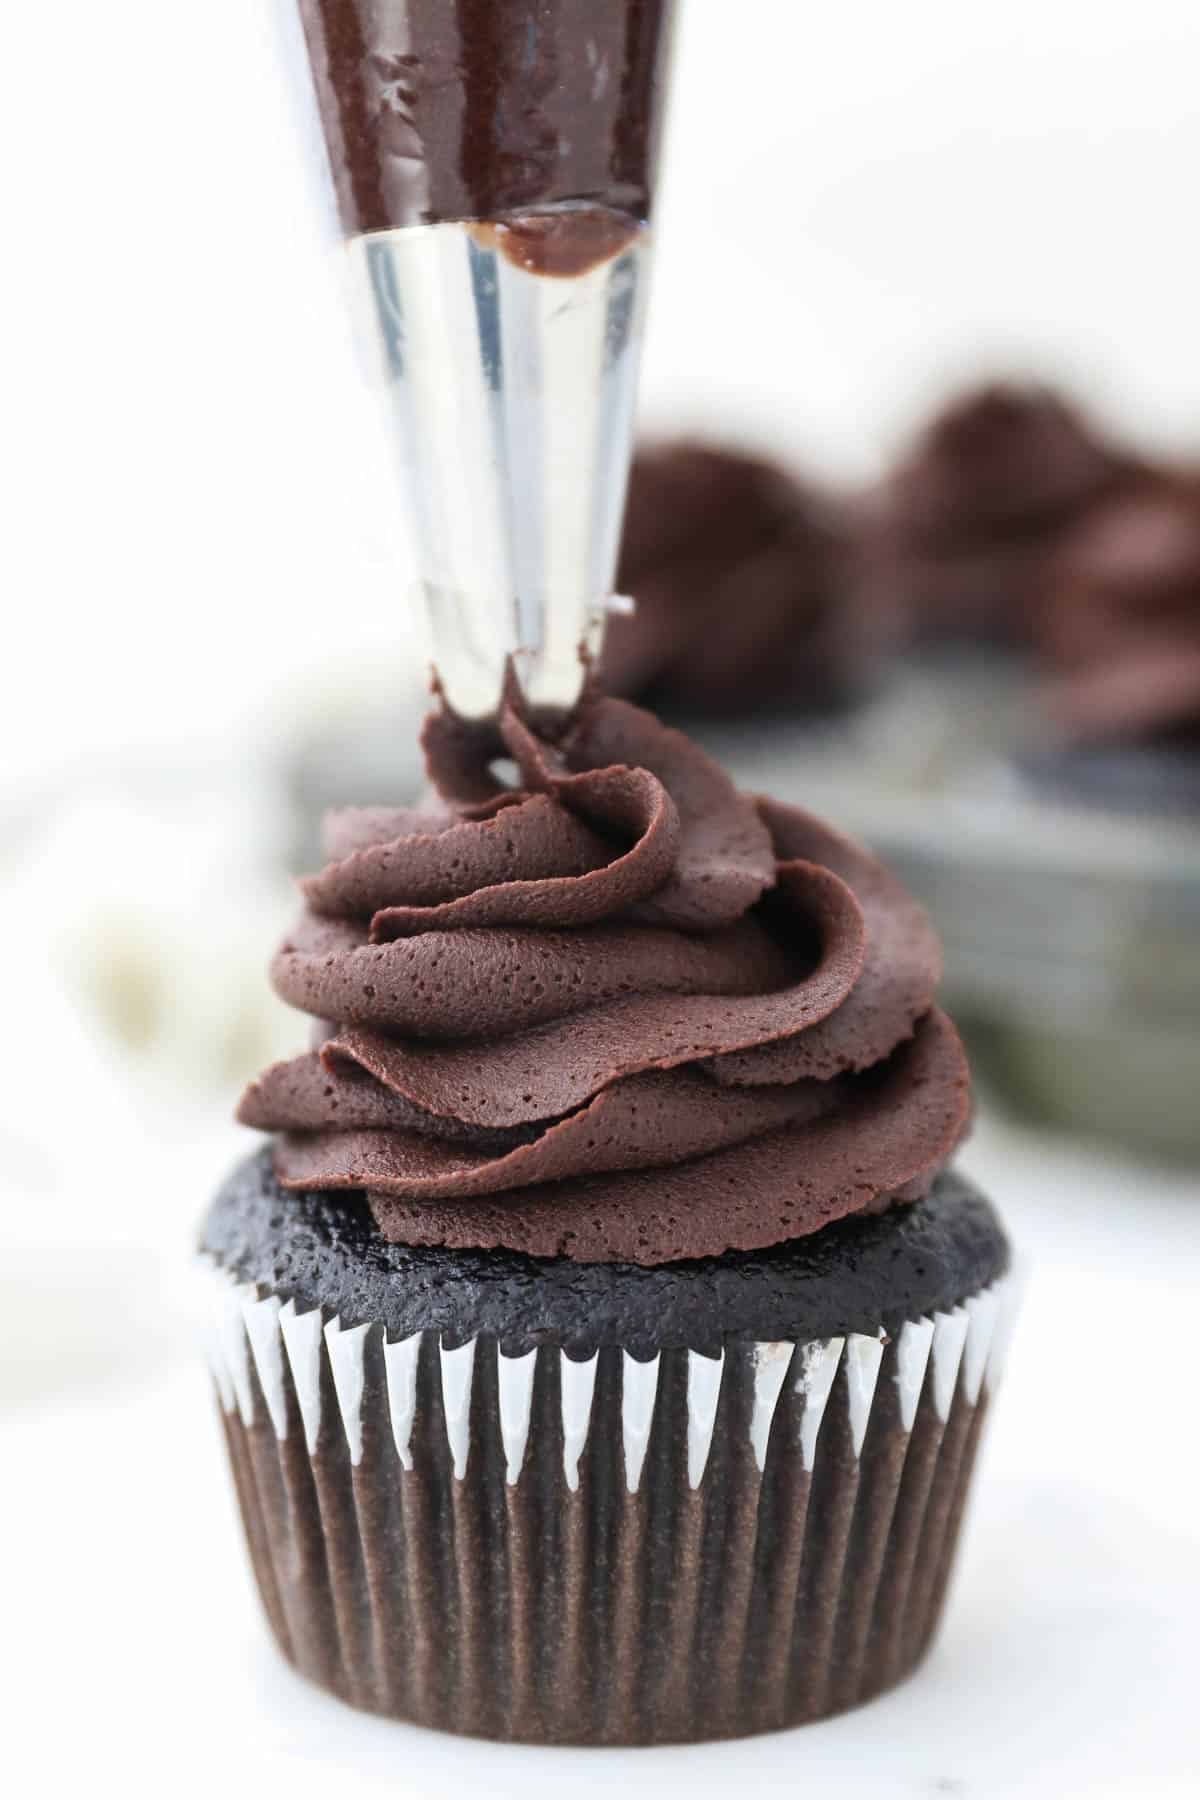 A piping bag with chocolate frosting piping a cupcake